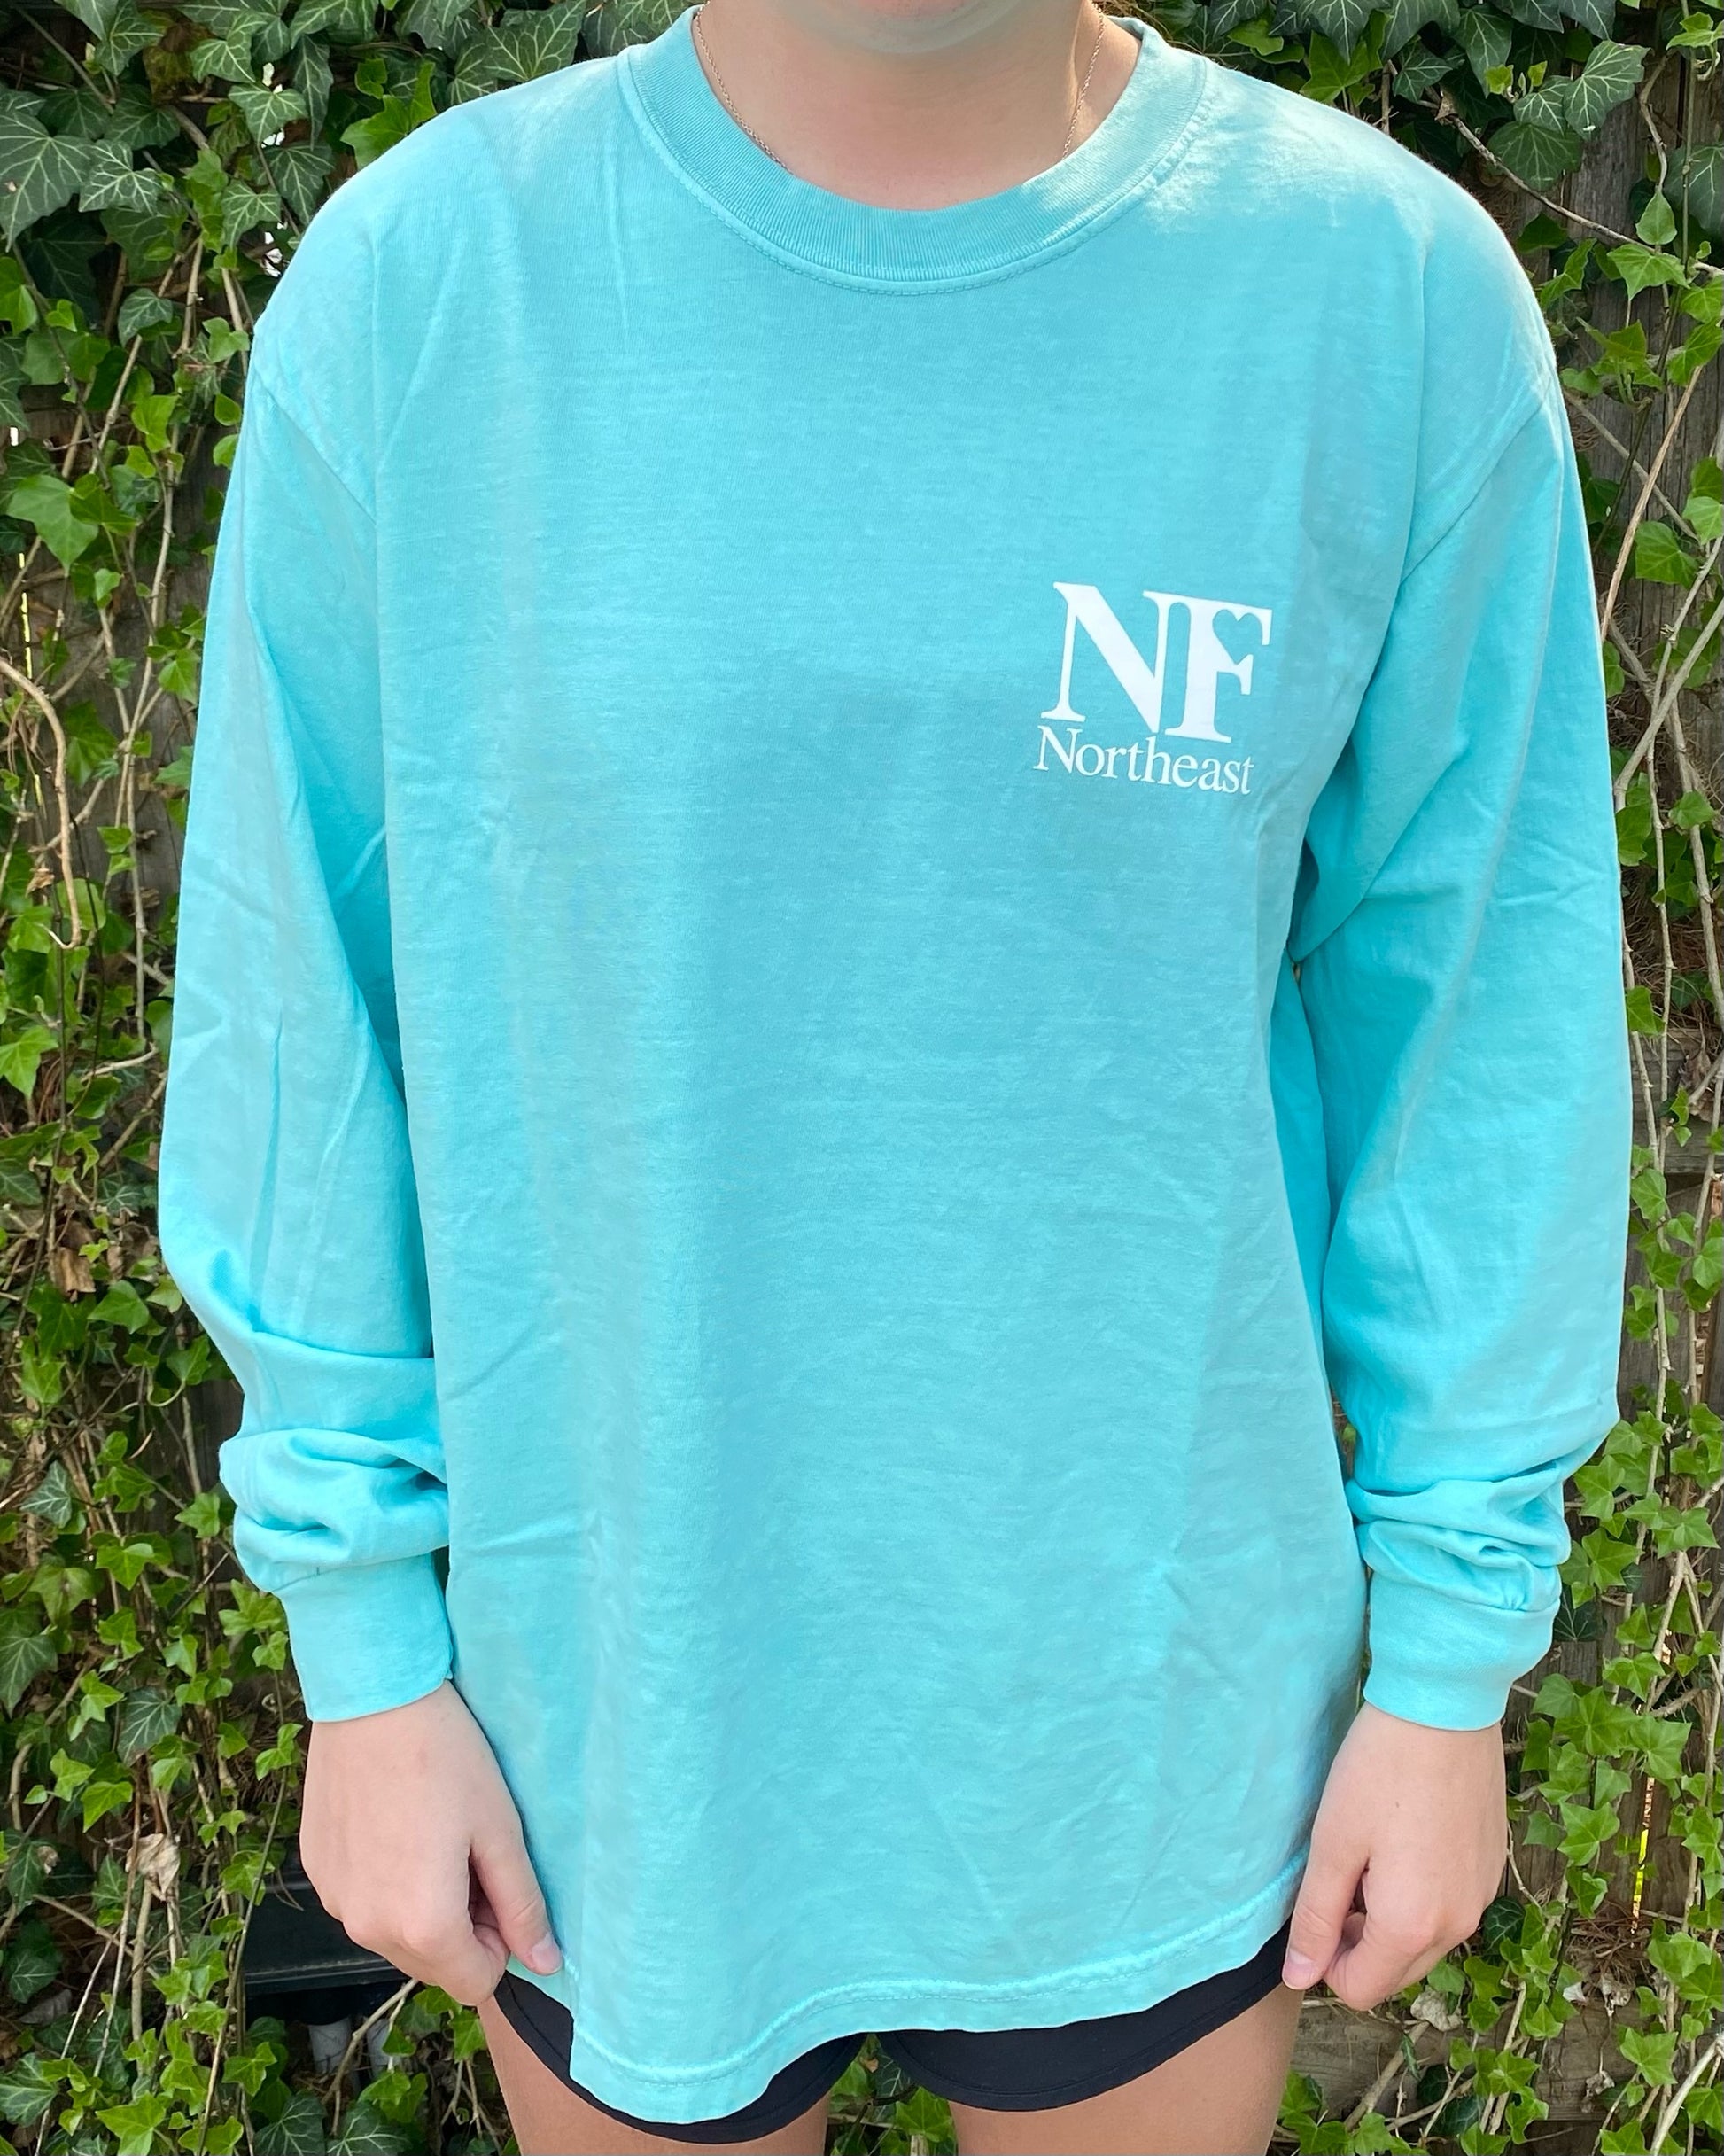 long sleeve teal shirt on woman with NF Northeast logo printed on upper left chest